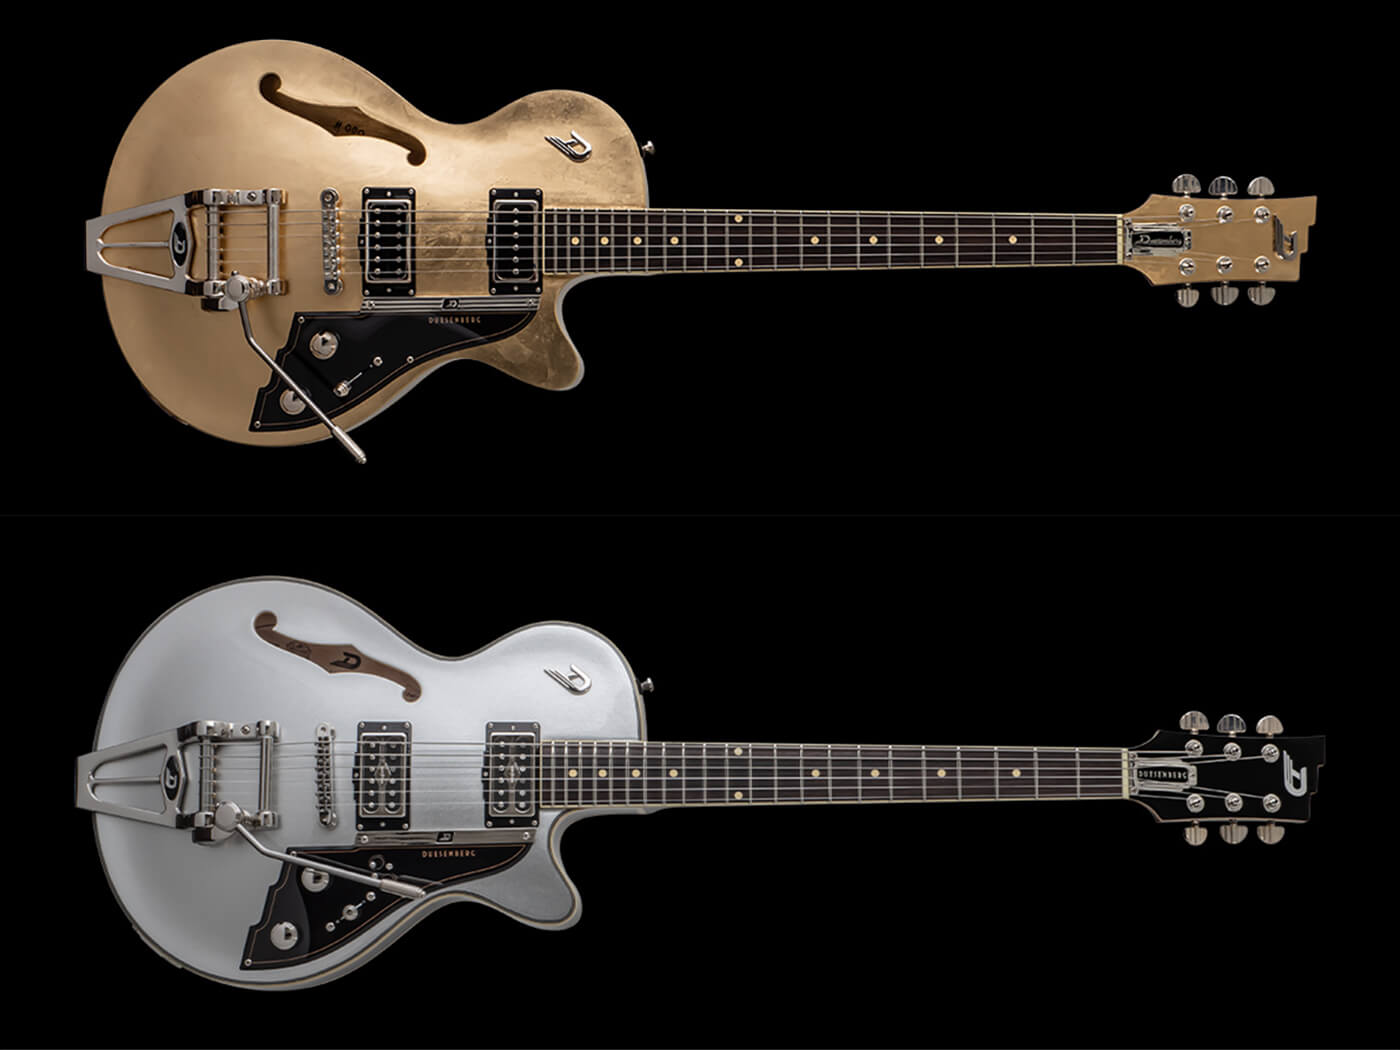 NAMM 2020: Duesenberg celebrates 25 years with limited-edition 